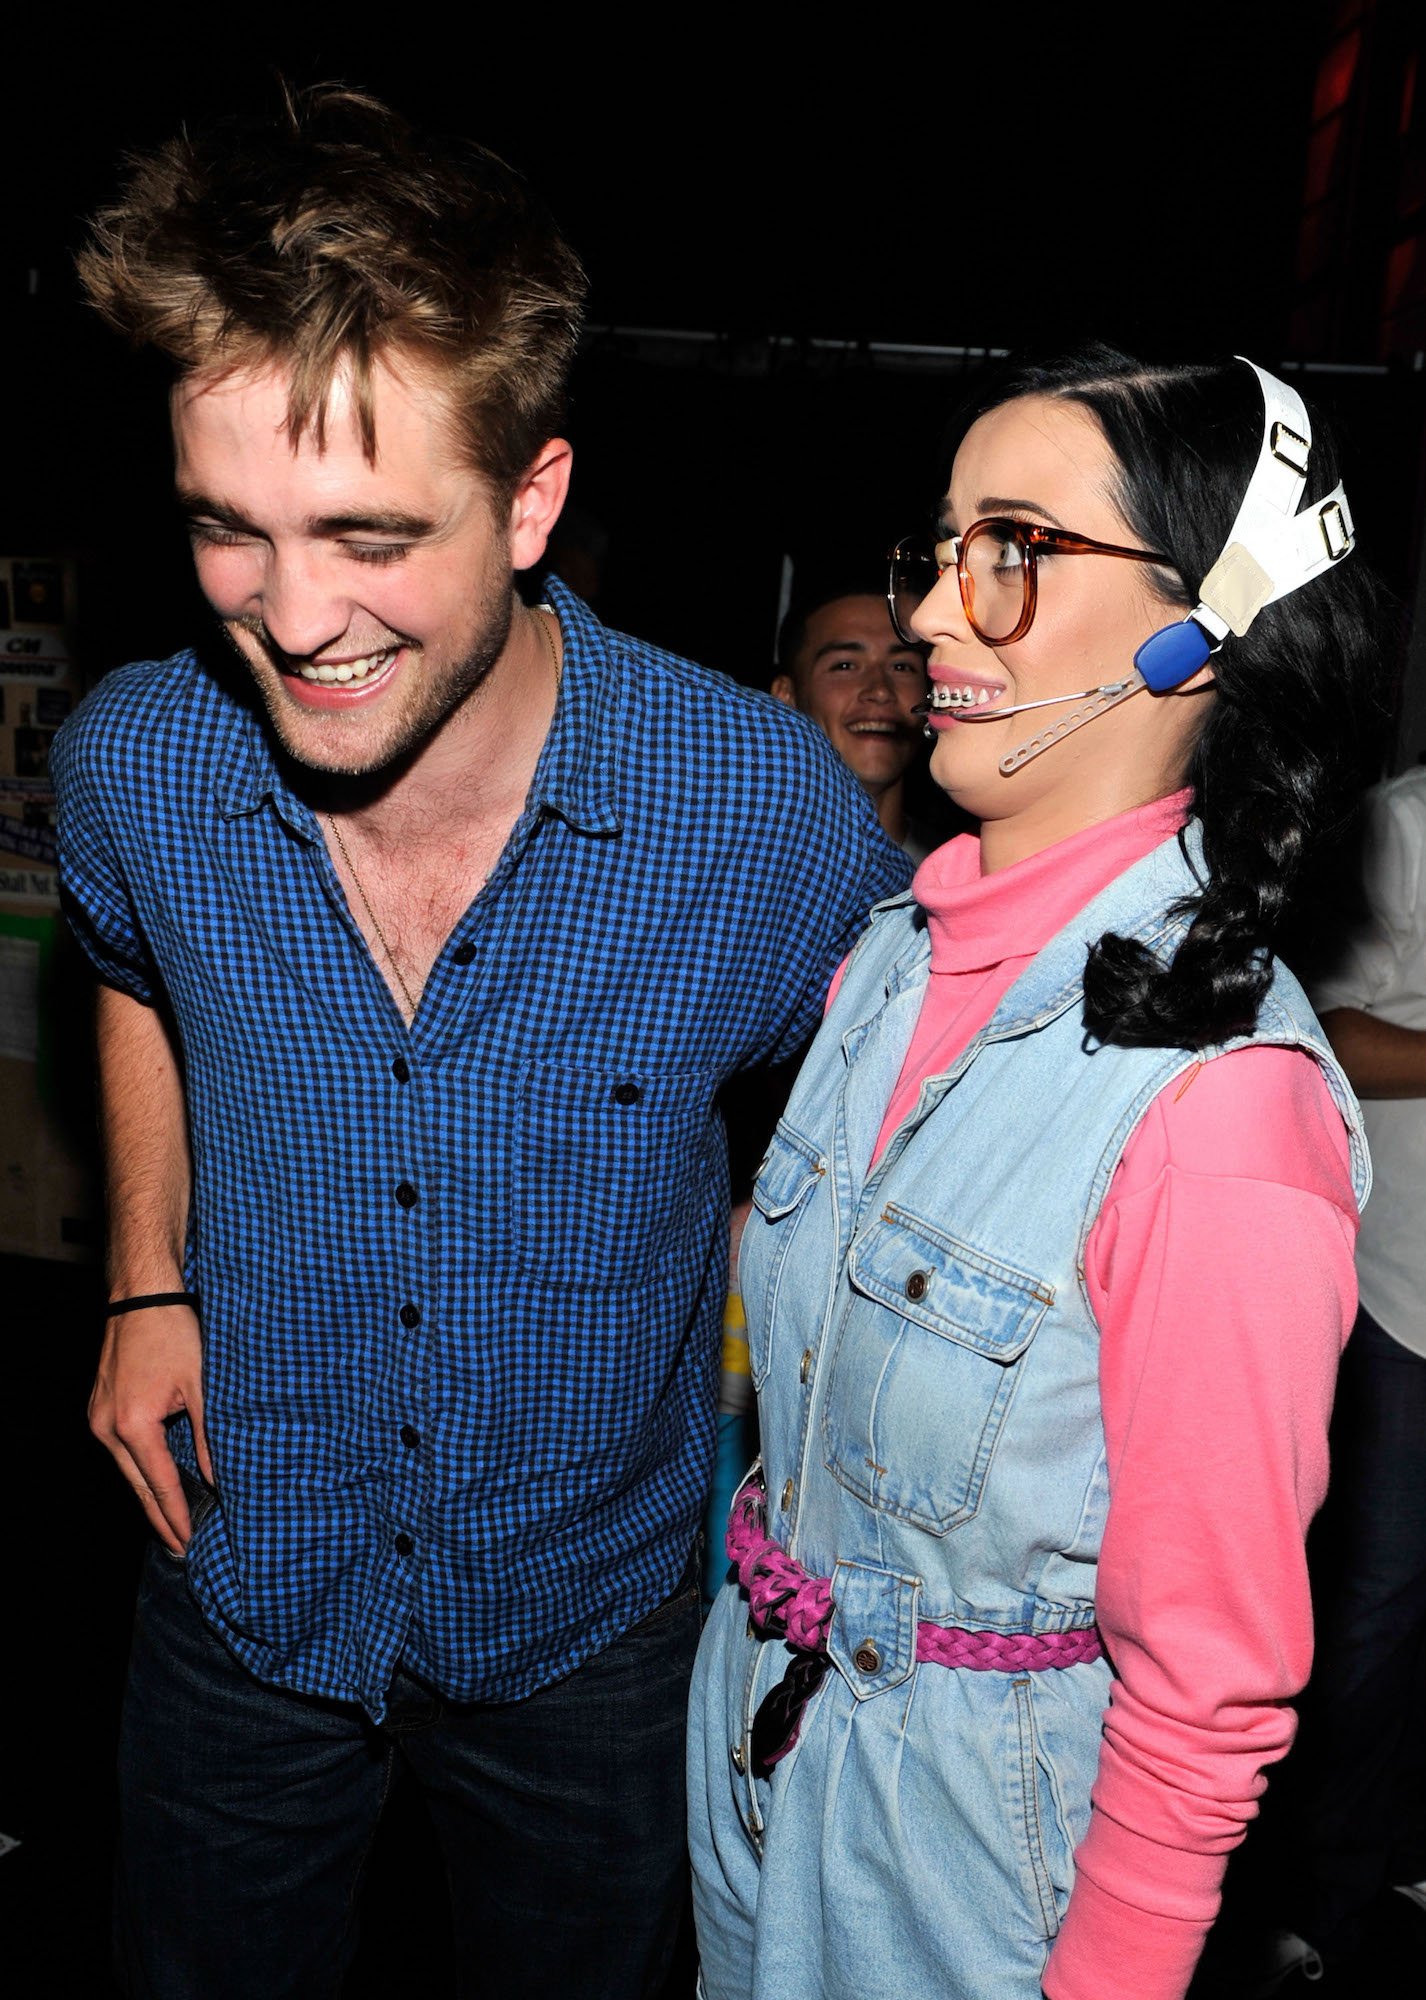 Robert Pattinson and Katy Perry Did Karaoke Together Once; Perry Was Angry  The Hilarious Video Leaked